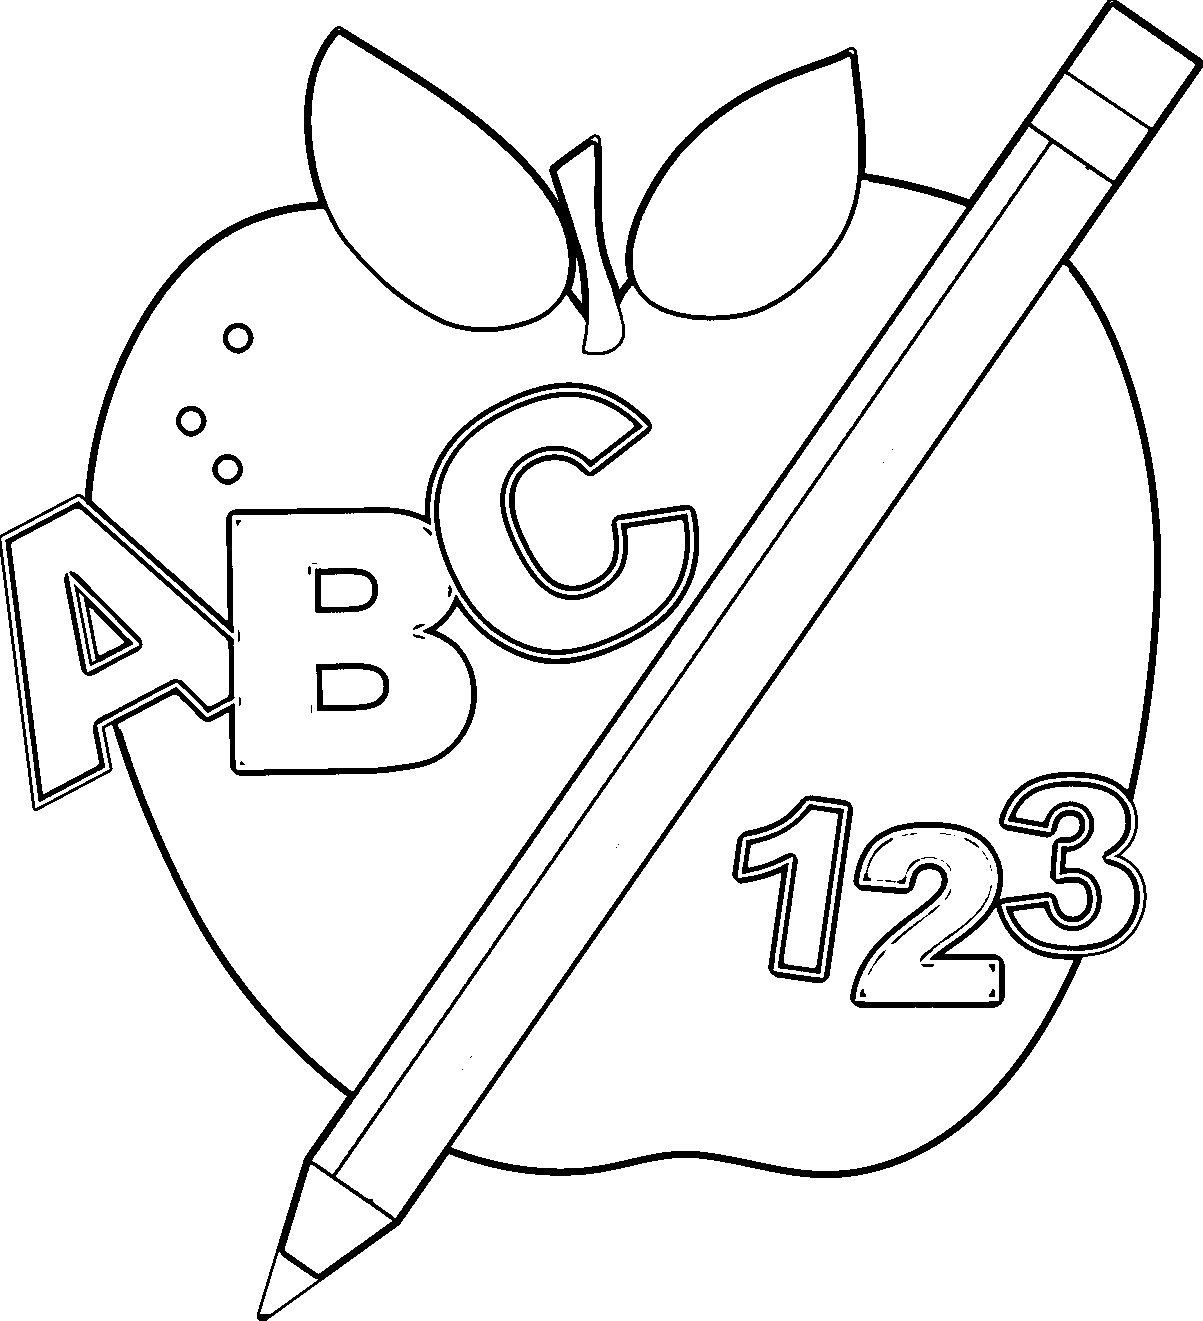 Abc 123 Clipart Black And White.